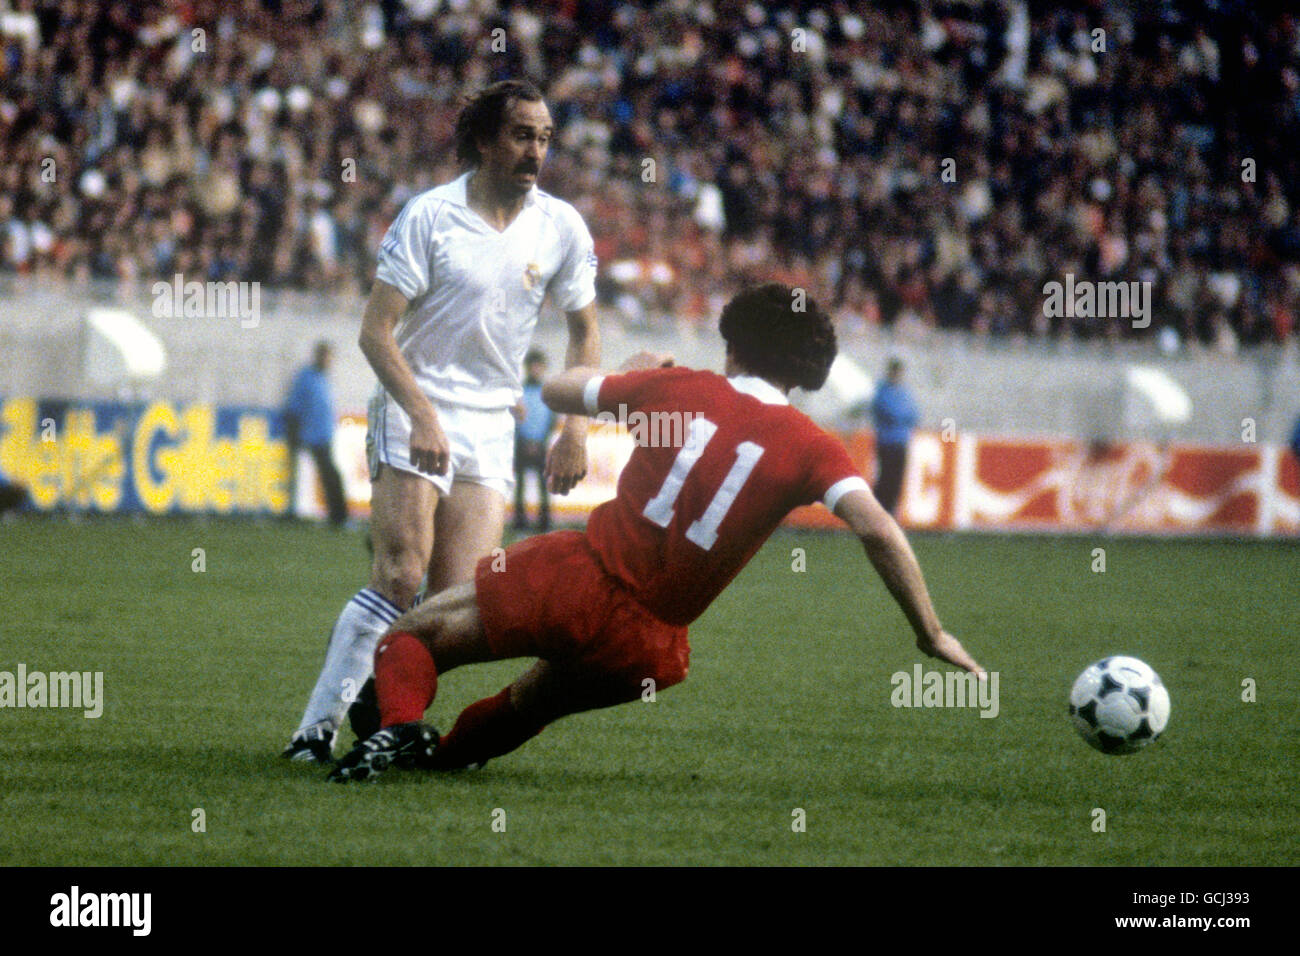 Liverpool's Graeme Souness slides in on Real Madrid's Uli Stielike despite the ball having already gone Stock Photo